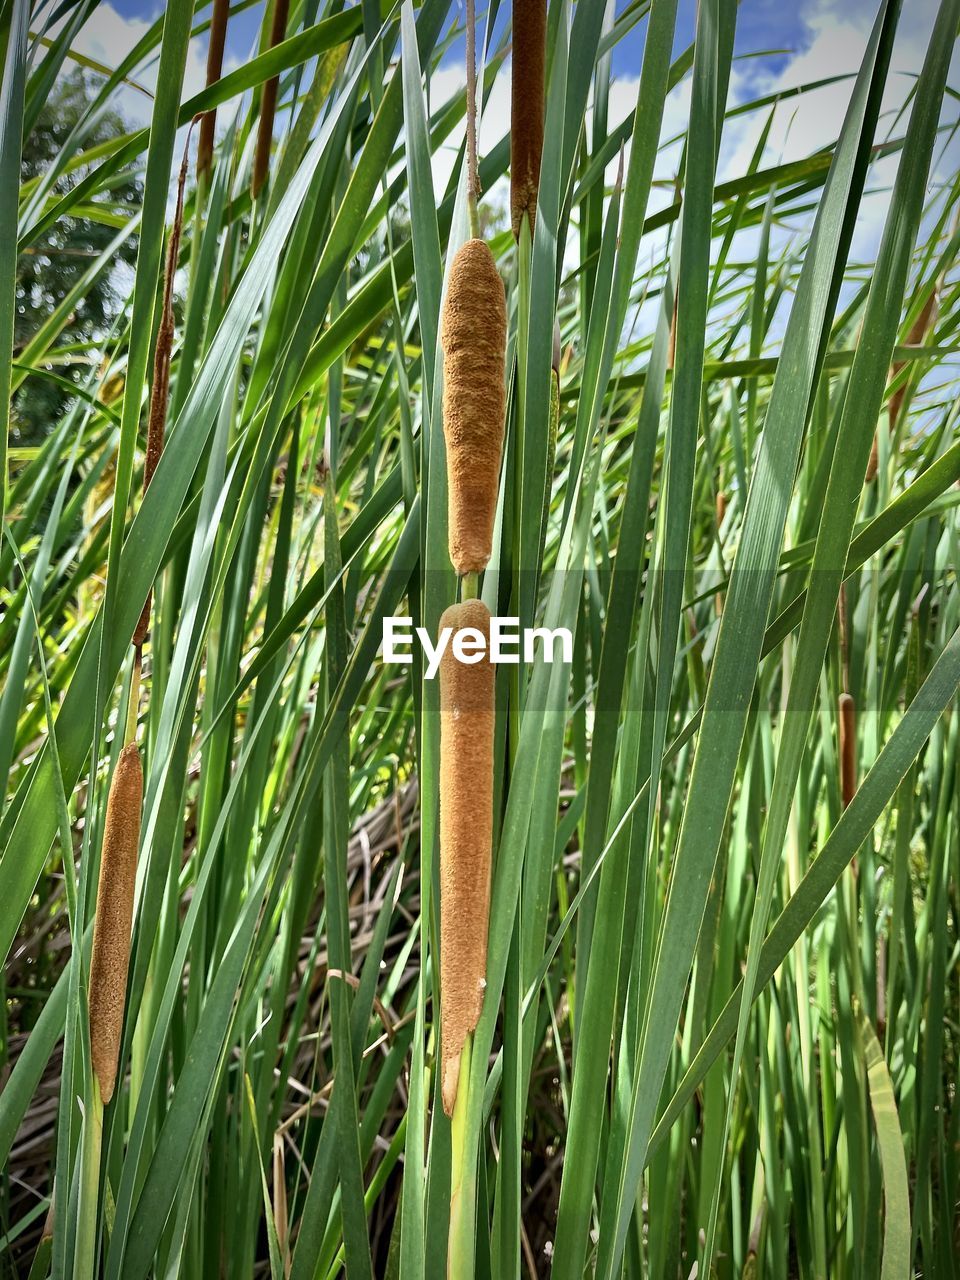 plant, growth, green, grass, nature, plant stem, crop, beauty in nature, field, land, day, agriculture, no people, flower, tree, close-up, outdoors, tranquility, leaf, bamboo, cereal plant, cattail, plant part, sunlight